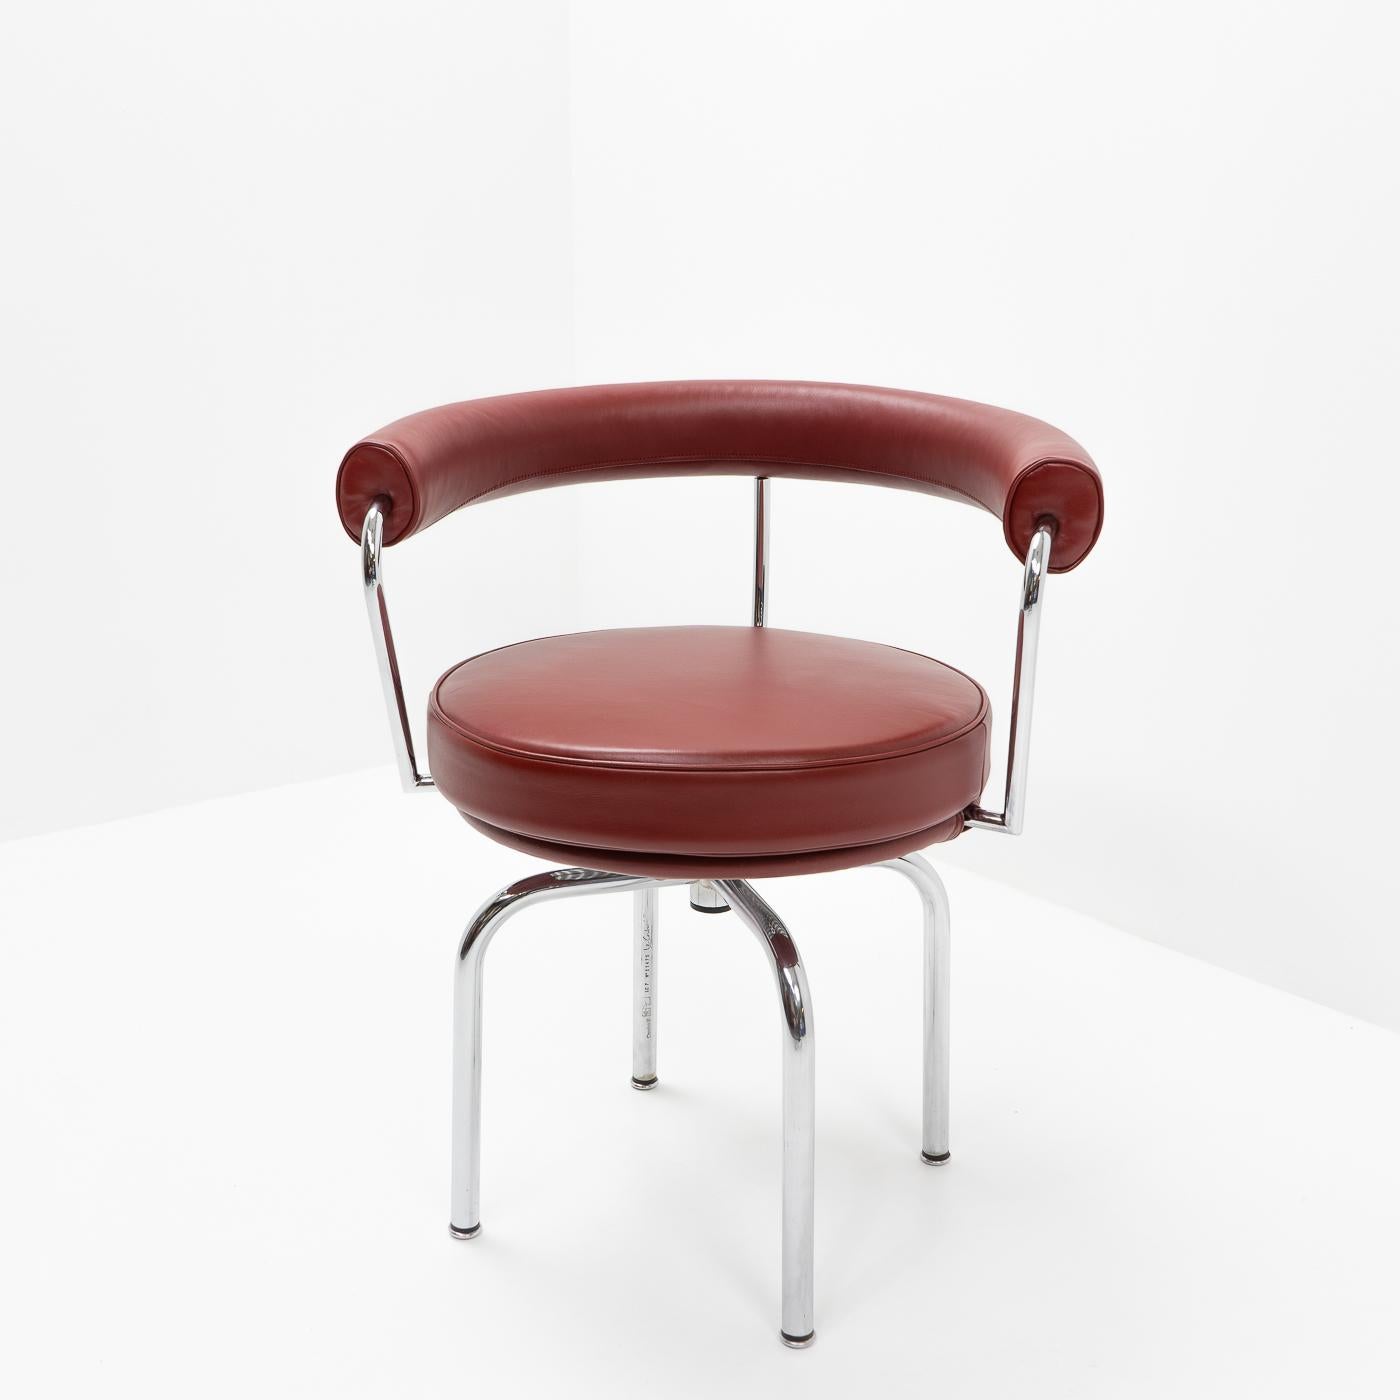 Even though this chair is part of the “LC” collection in production by Cassina, the actual design of this piece was designed by Charlotte Perriand, together with the matching LC8 stool.

Perriand designed this chair for her own apartment in Paris